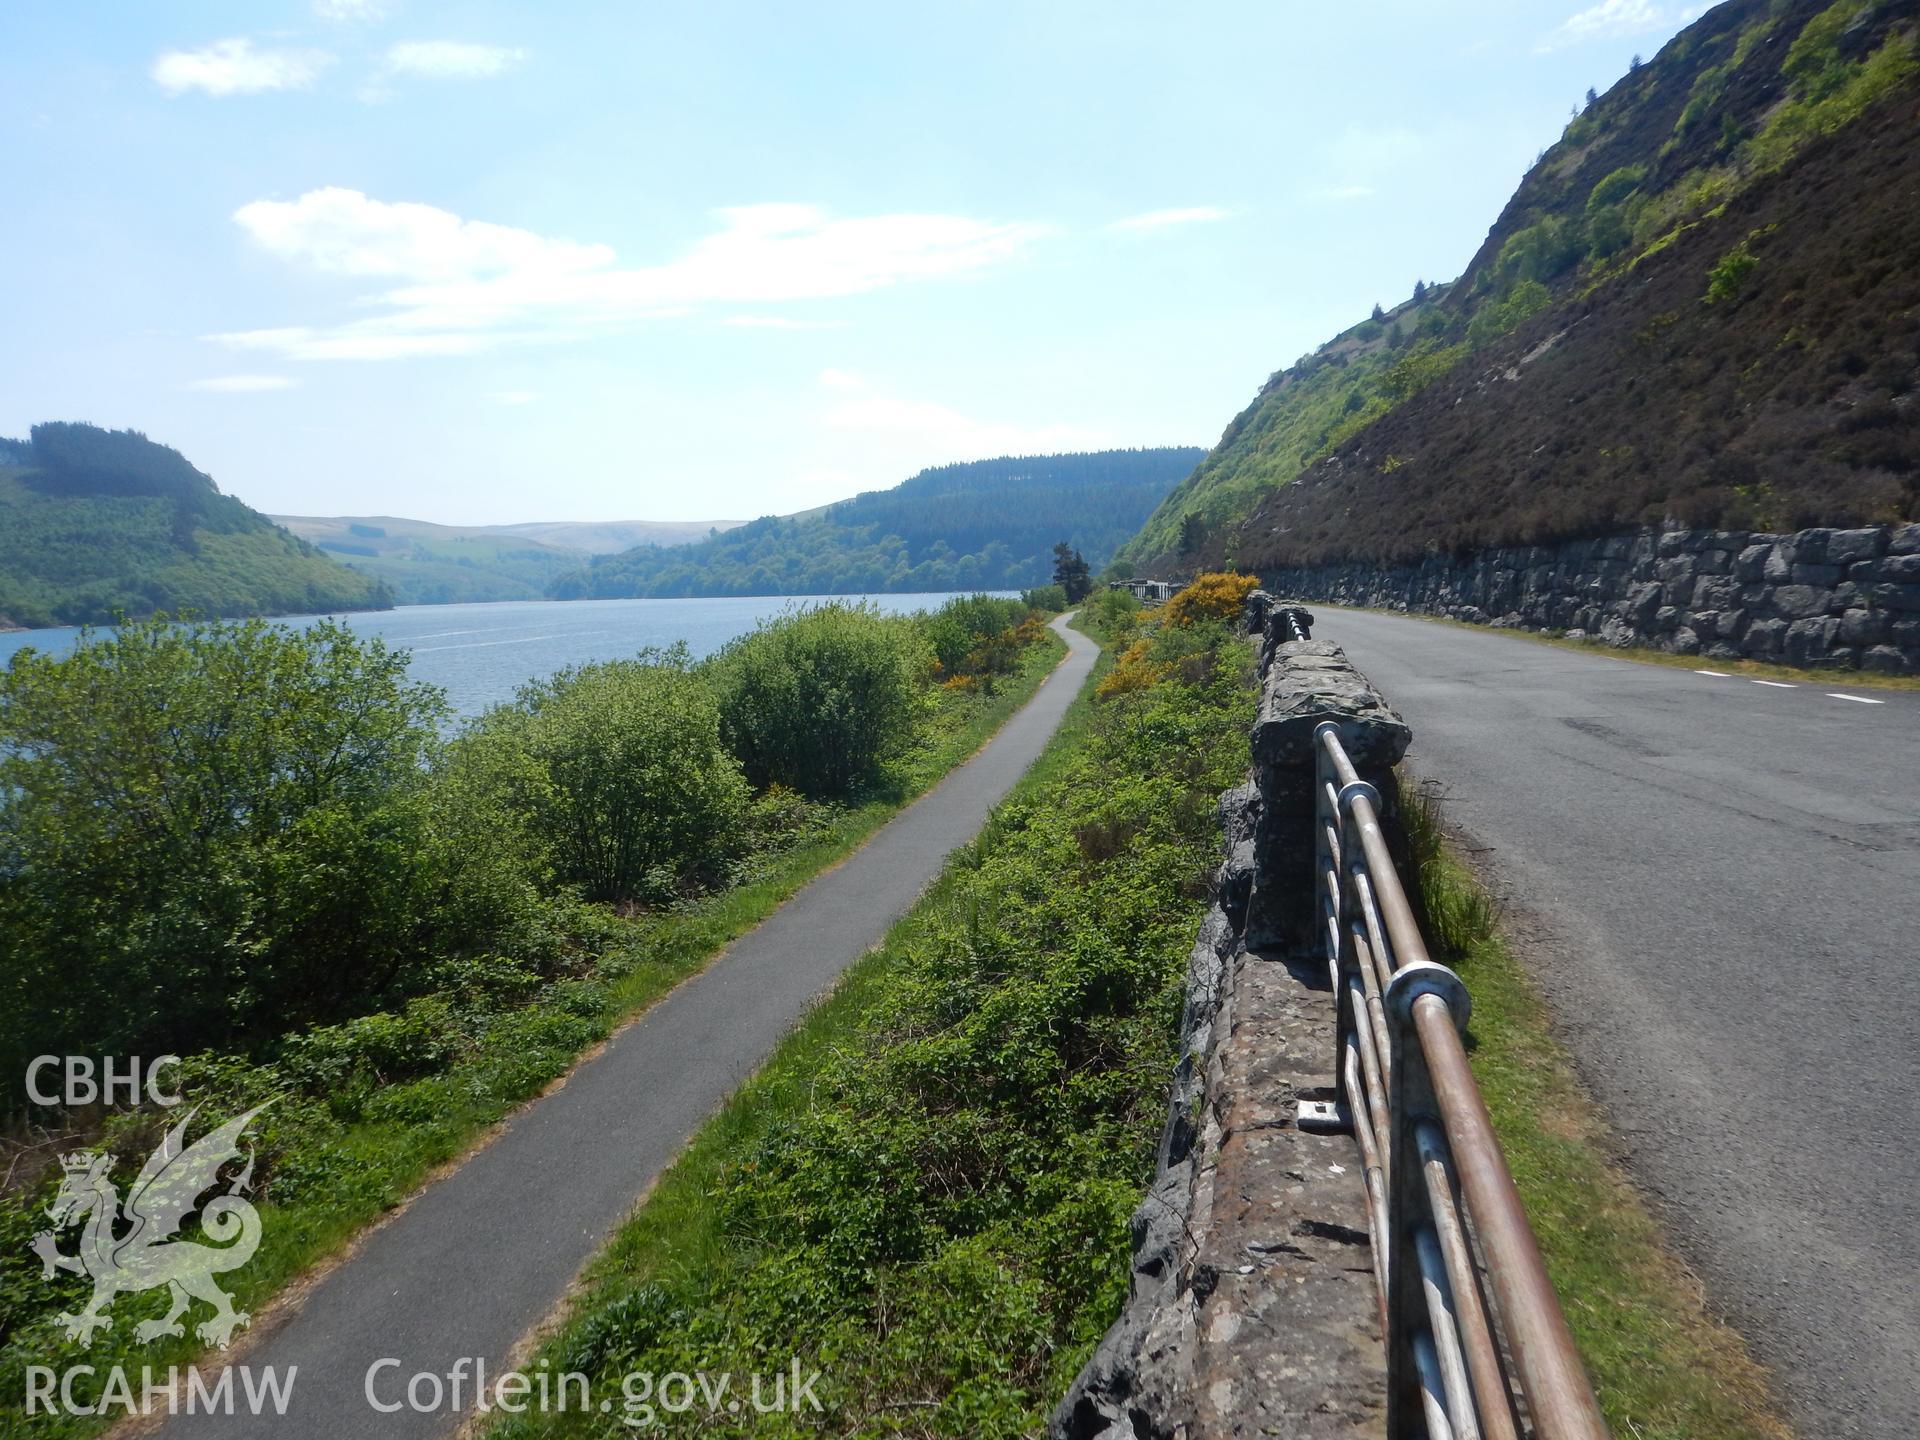 View looking south-west along proposed cable route on north-west bank of Caban Coch reservoir. Photographed for Archaeological Desk Based Assessment of Afon Claerwen, Elan Valley, Rhayader. Assessment by Archaeology Wales in 2018. Report no. 1681.